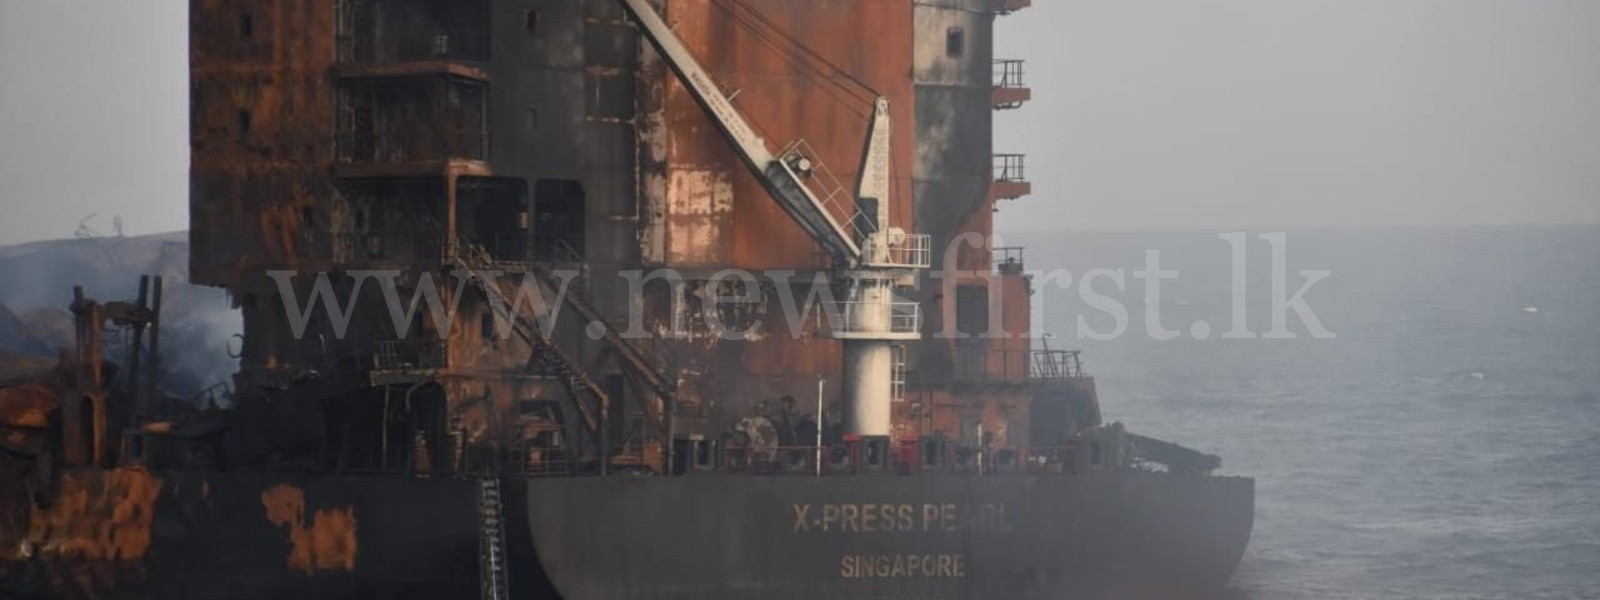 (LATEST PICTURES) Salvors onboard MV X-Press Pearl after dousing the fire